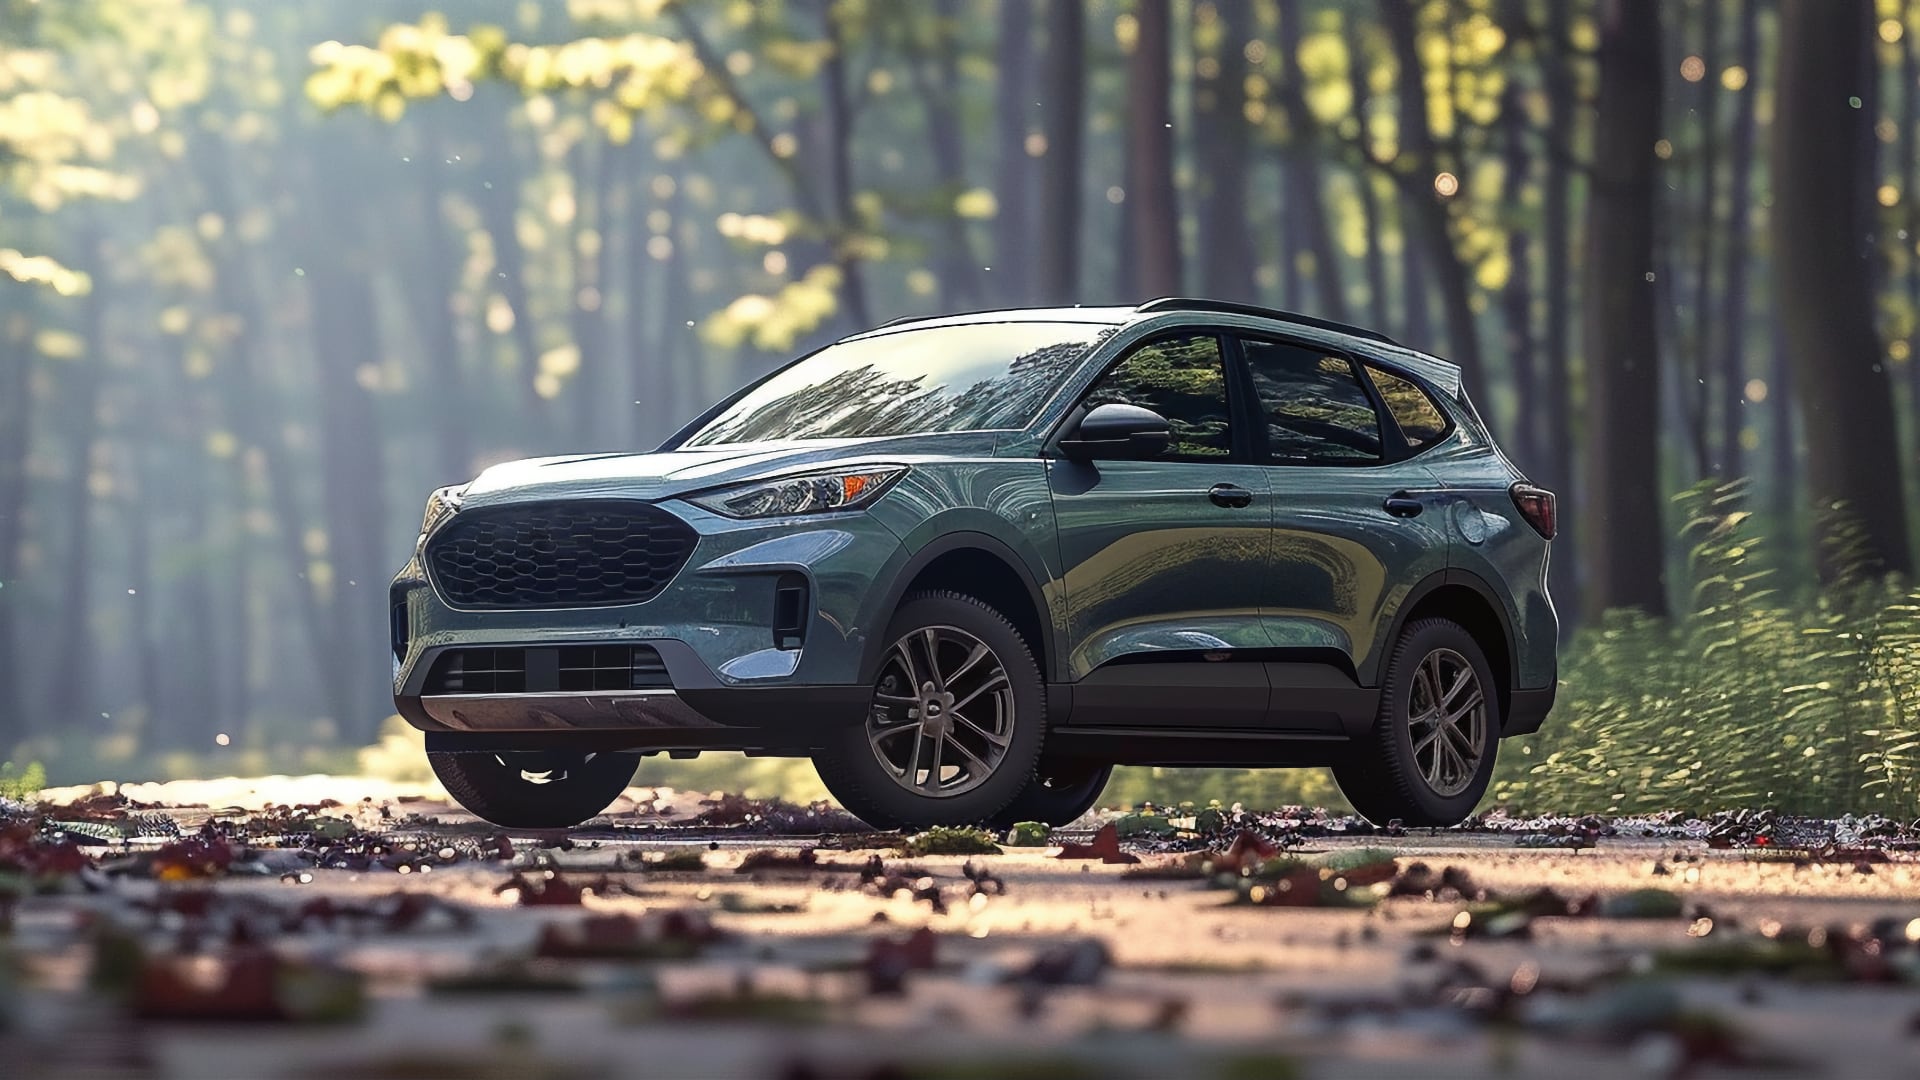 The 2020 Ford Escape, a year to avoid, is parked in a wooded area.